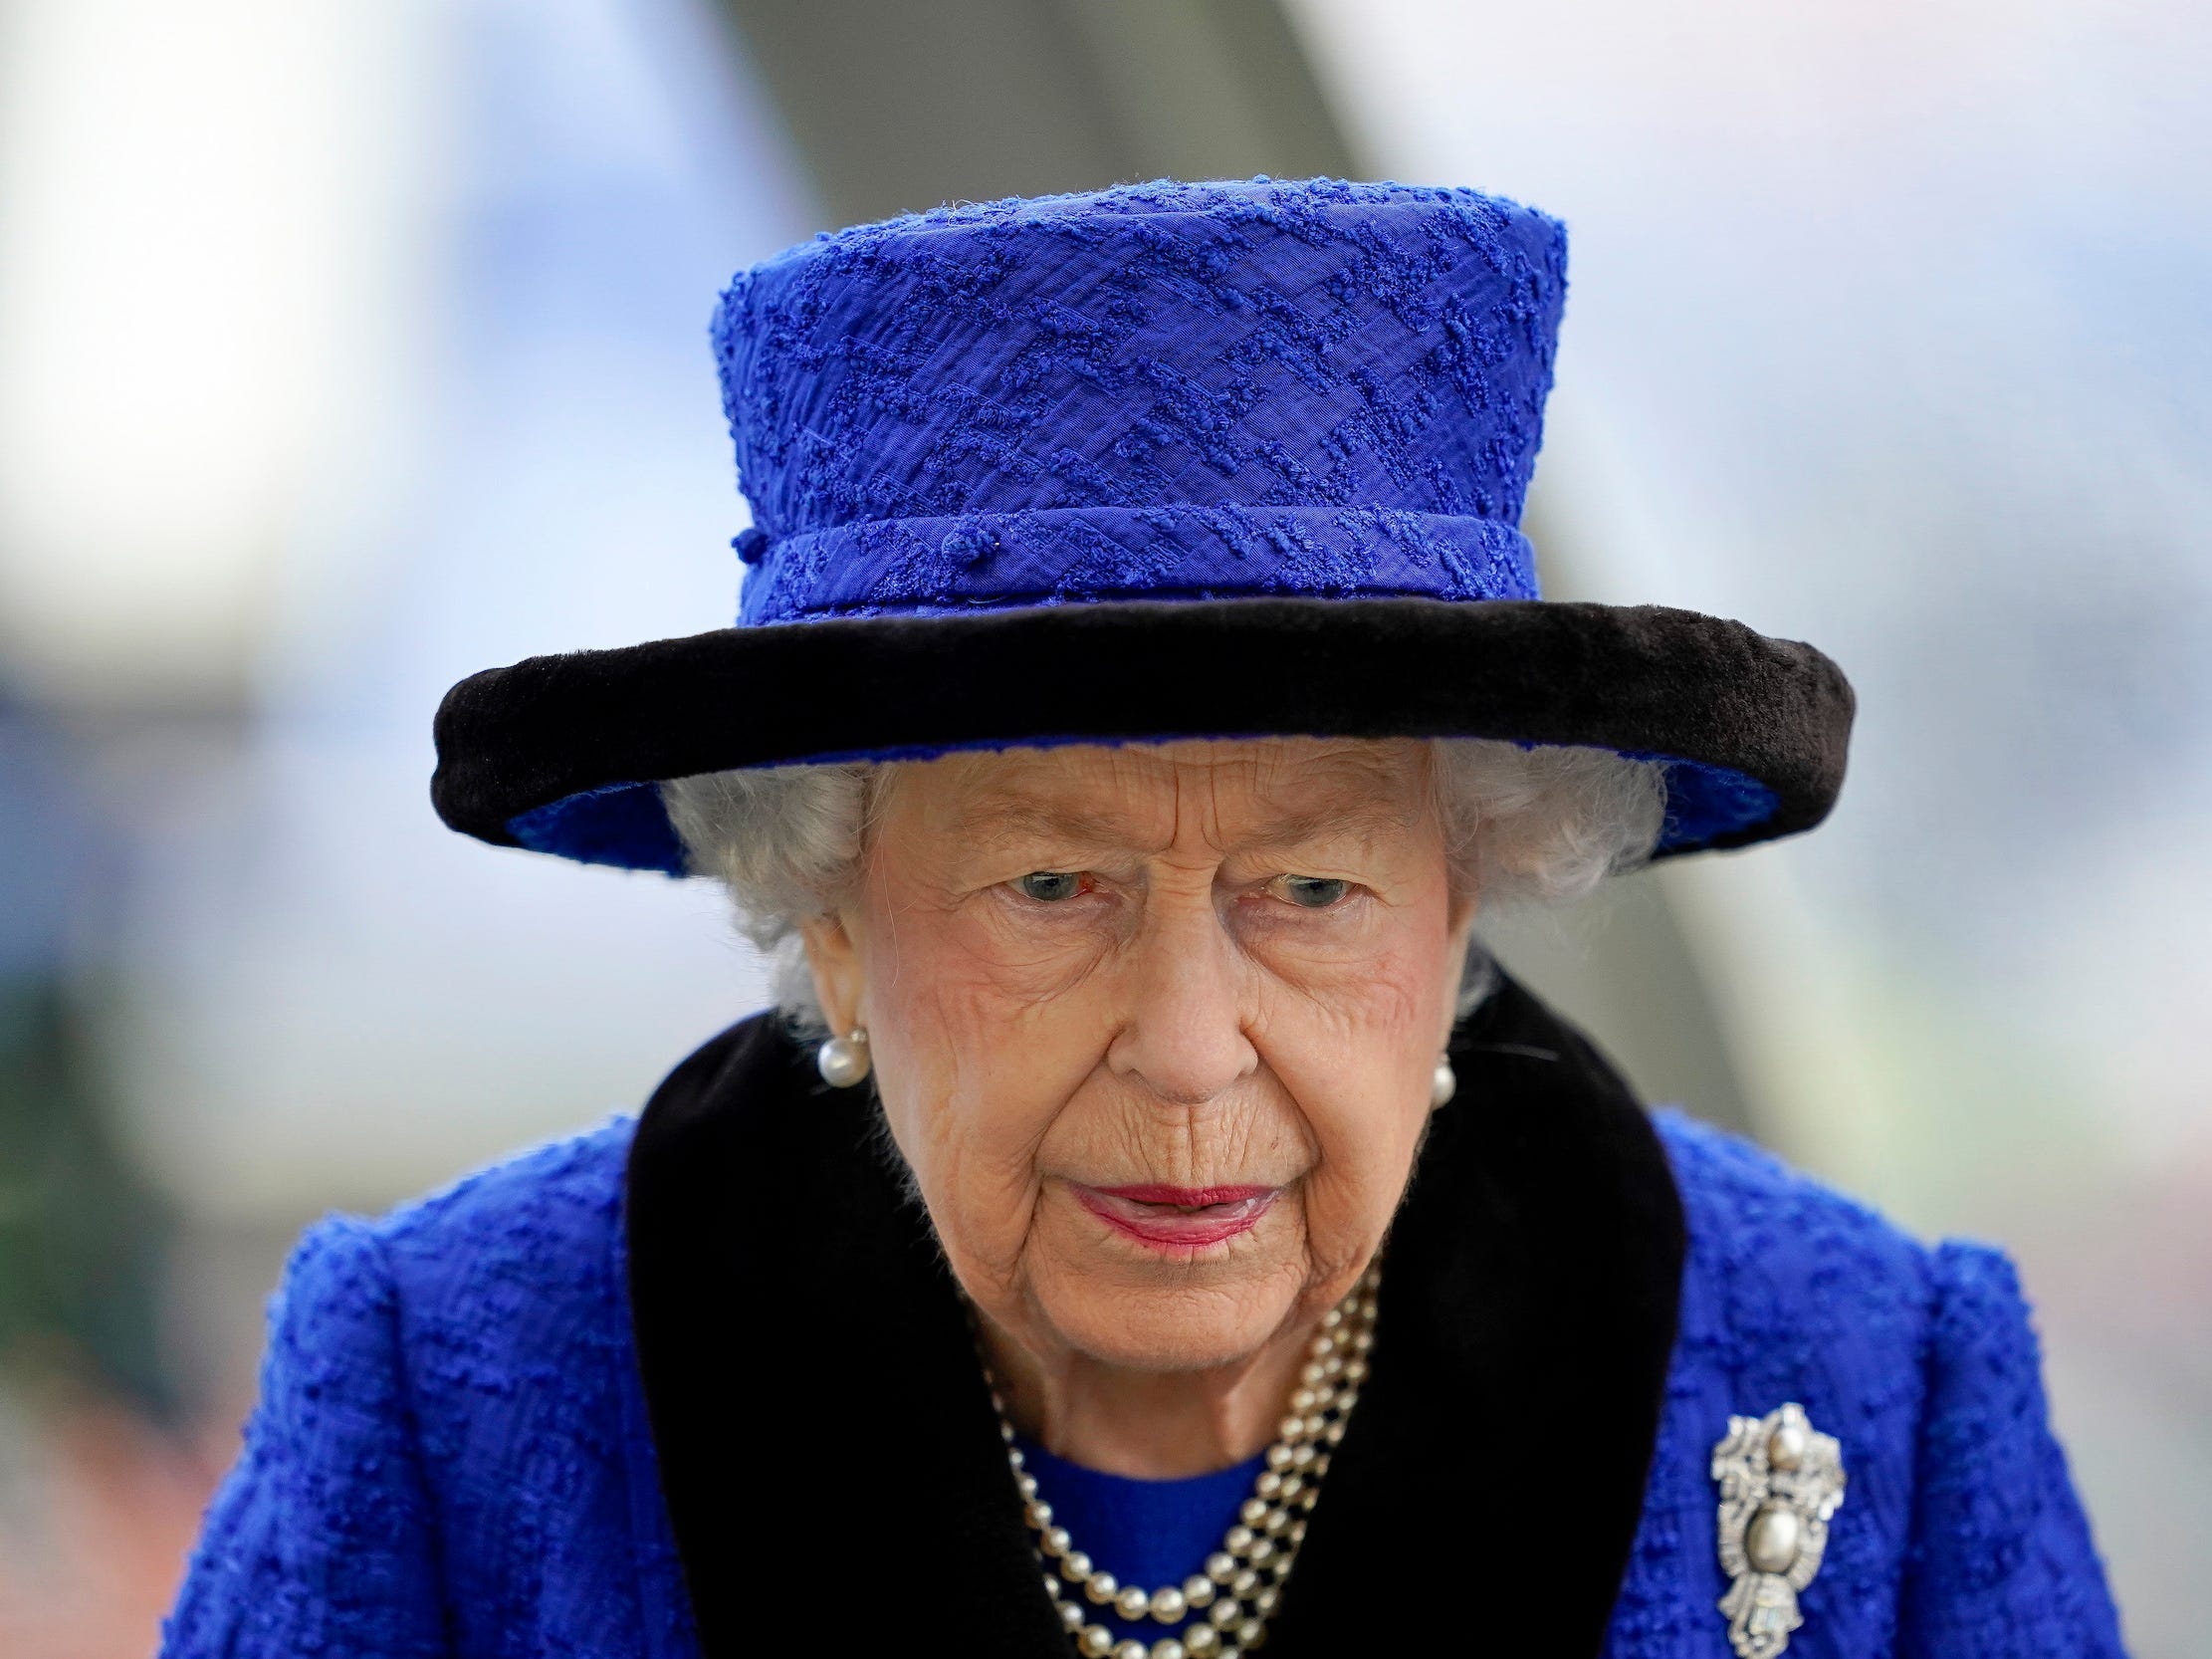 Queen Elizabeth II during the Qipco British Champions Day at Ascot Racecourse on October 16, 2021 in Ascot, England.